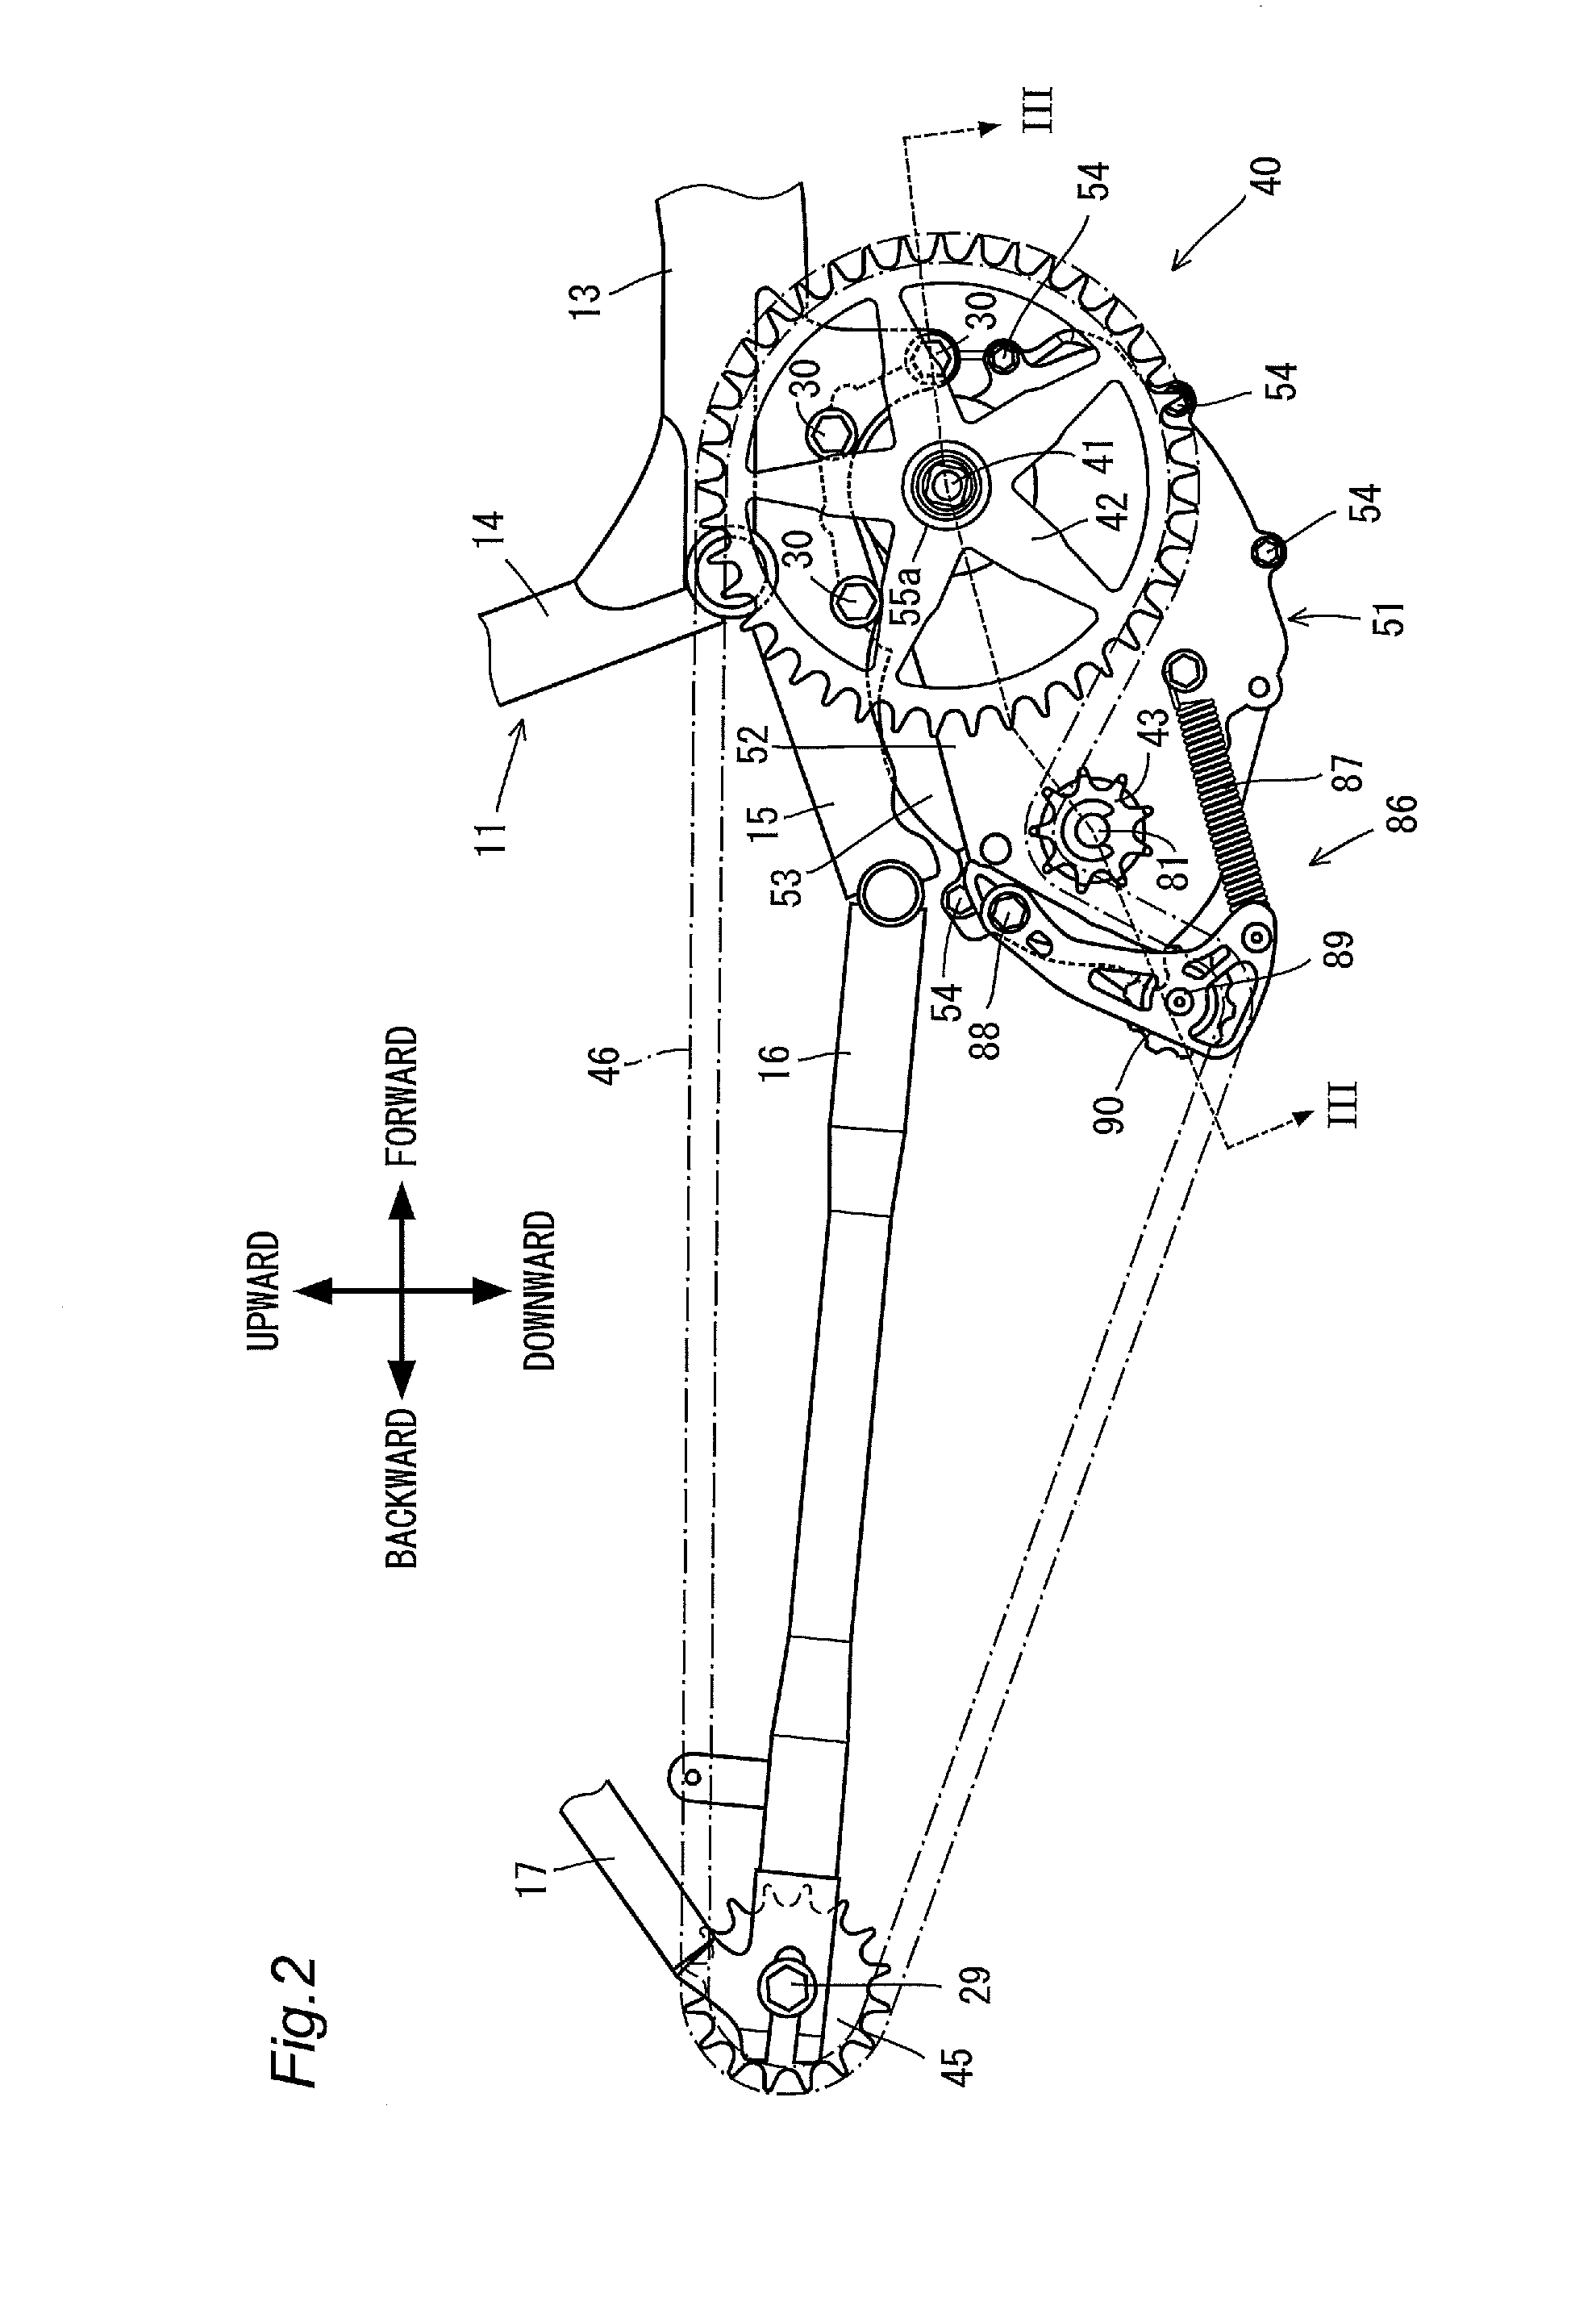 Driving unit and battery-assisted bicycle